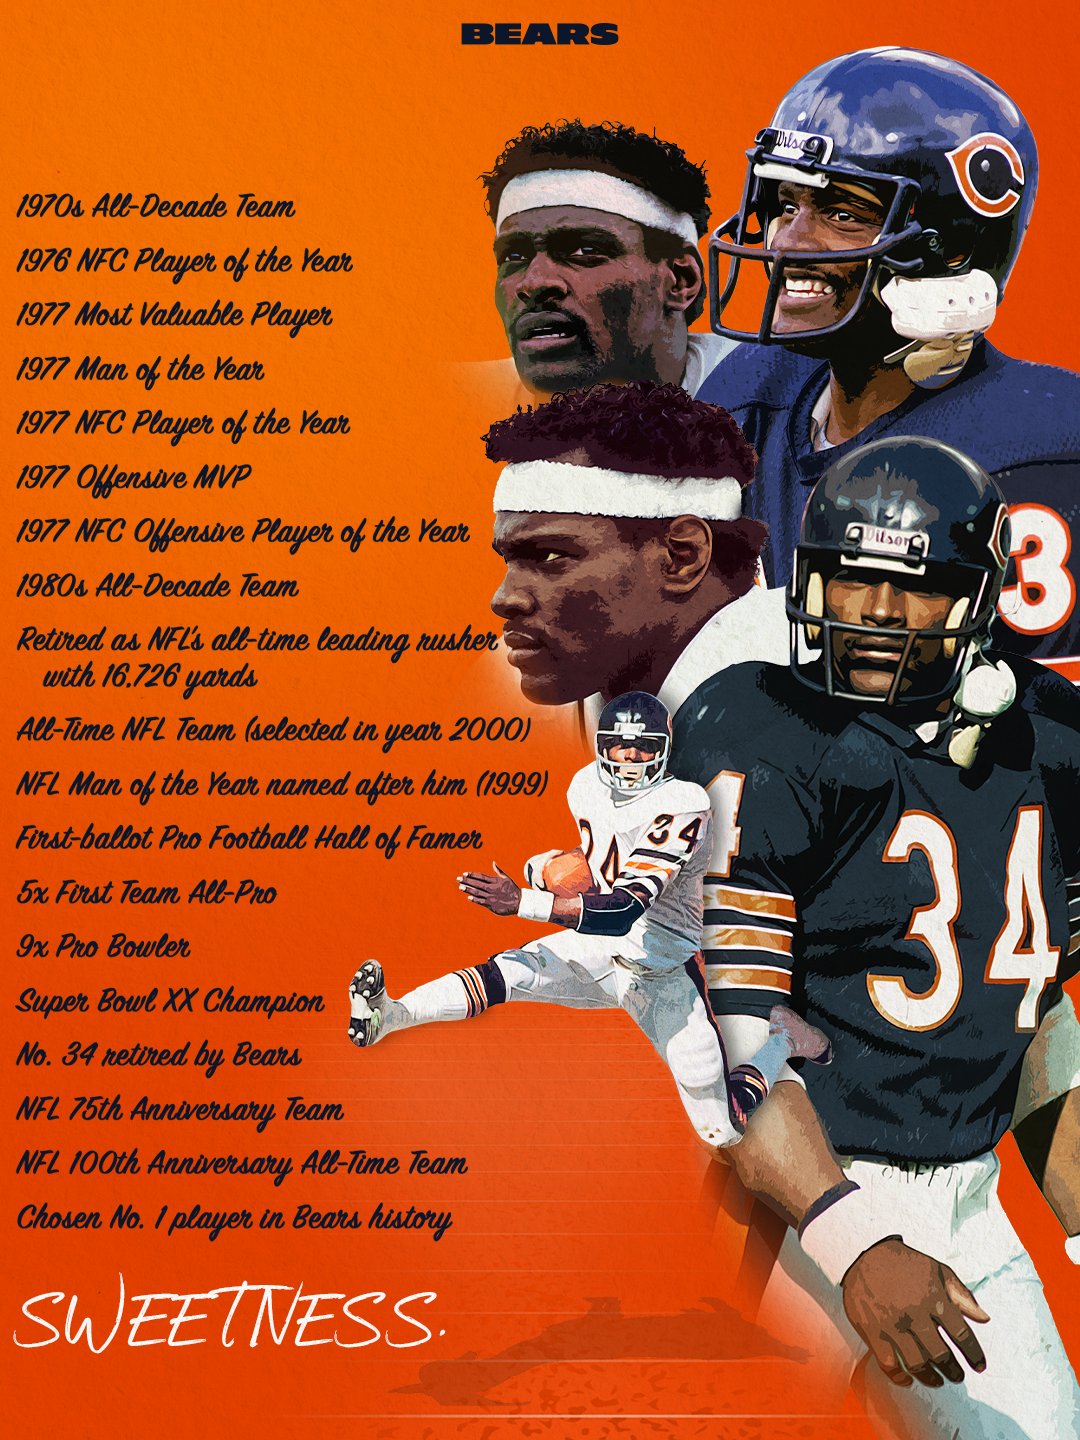 Stanley Easley on X: 'RT @ChicagoBears: G.O.A.T. Happy birthday Sweetness,  we miss you. 